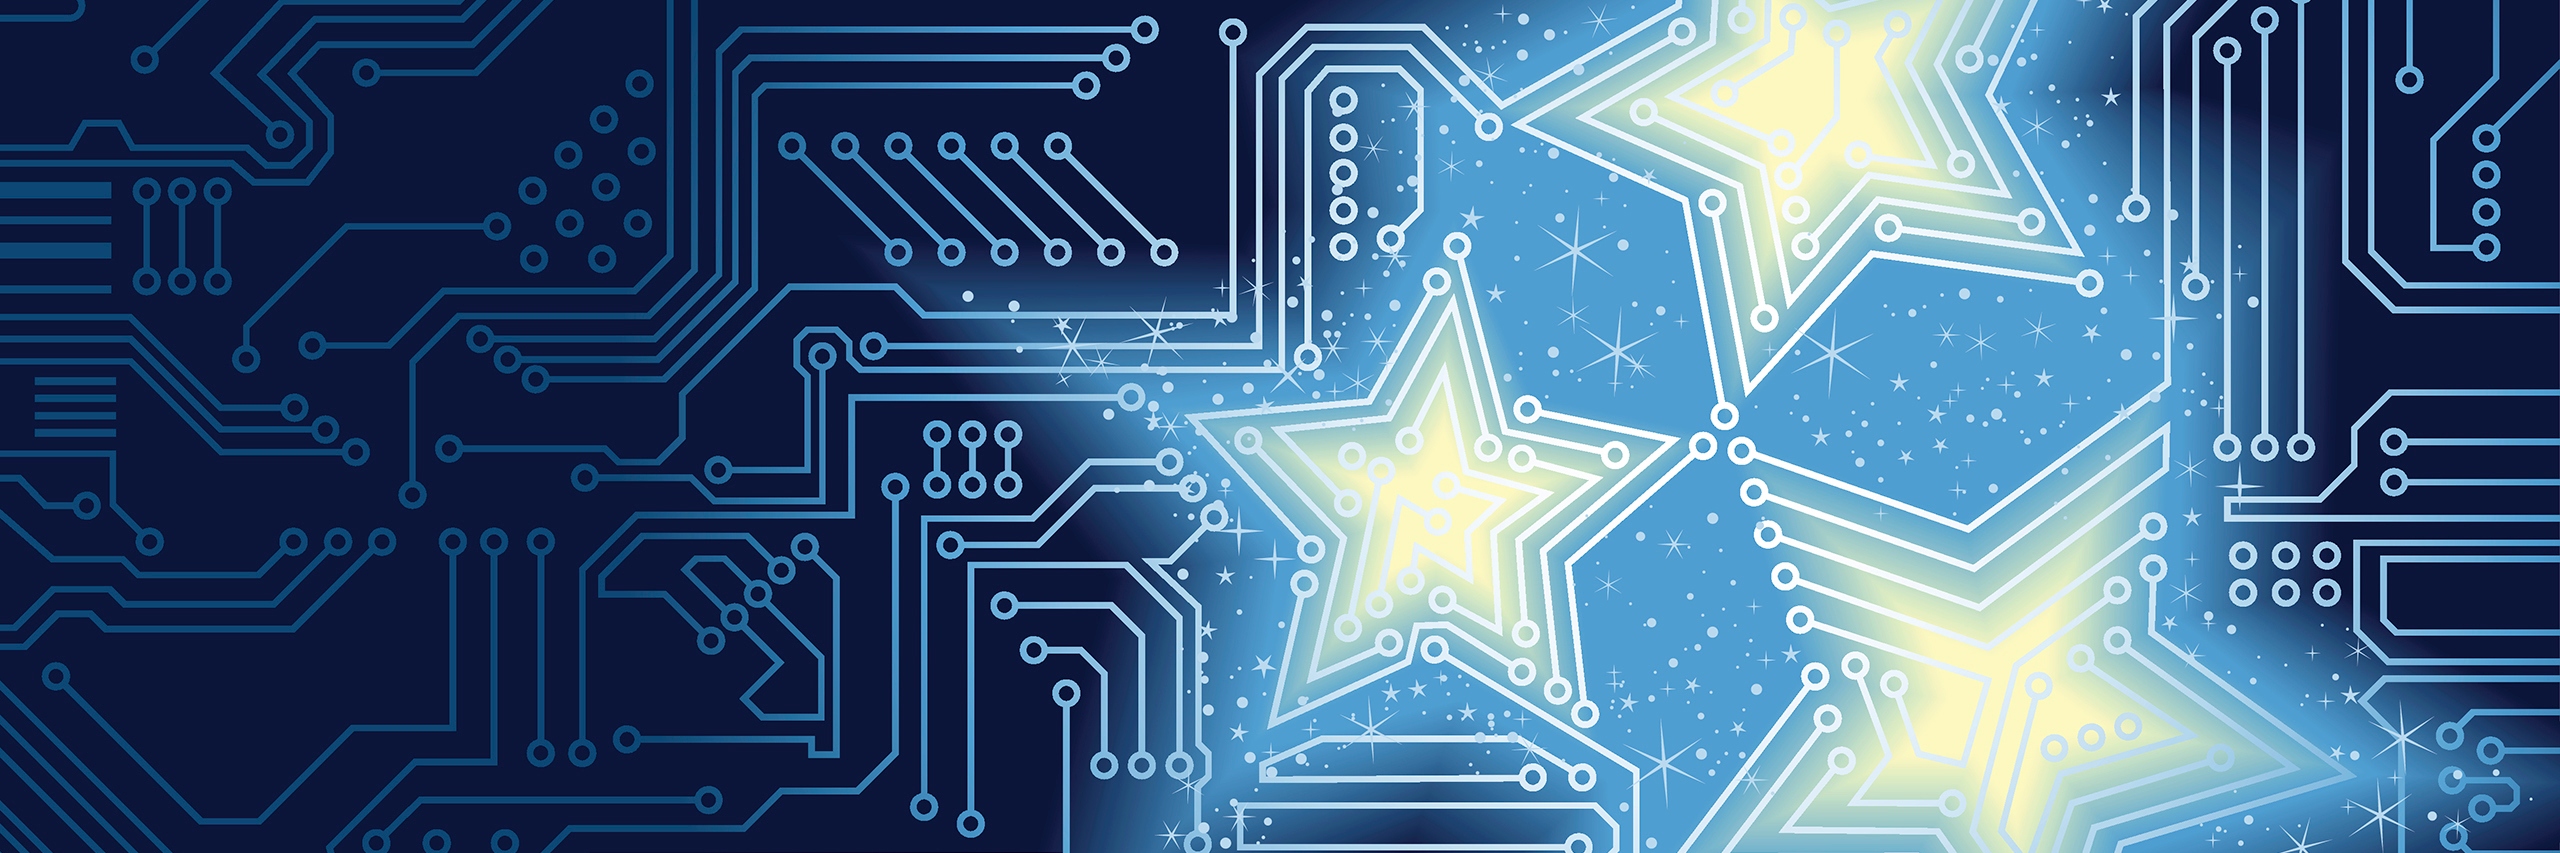 Abstract blue vector background with high tech circuit board forms a shiny Star